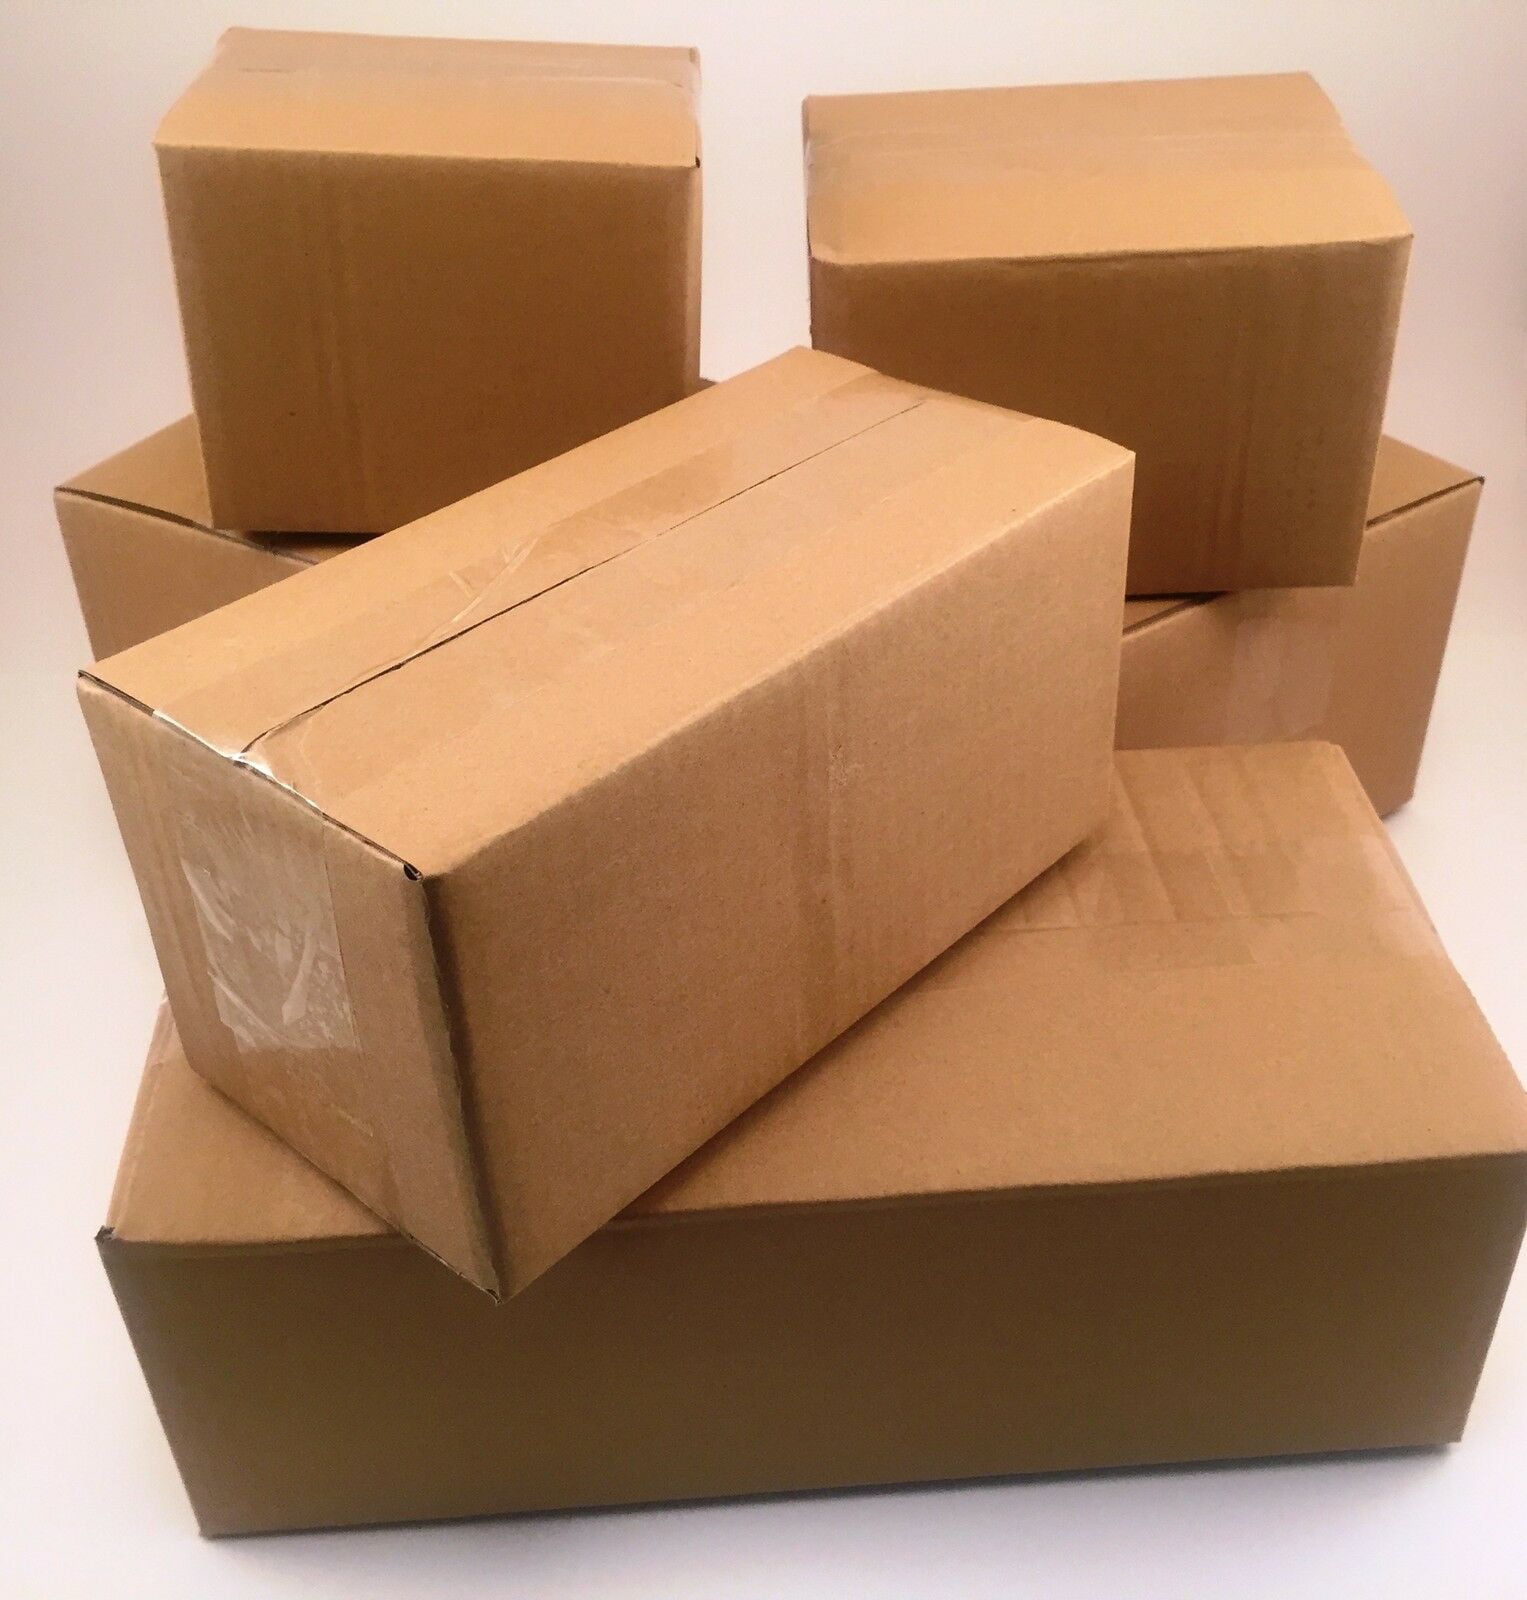 50 6x6x4 Cardboard Paper Boxes Mailing Packing Shipping Box Corrugated Carton 